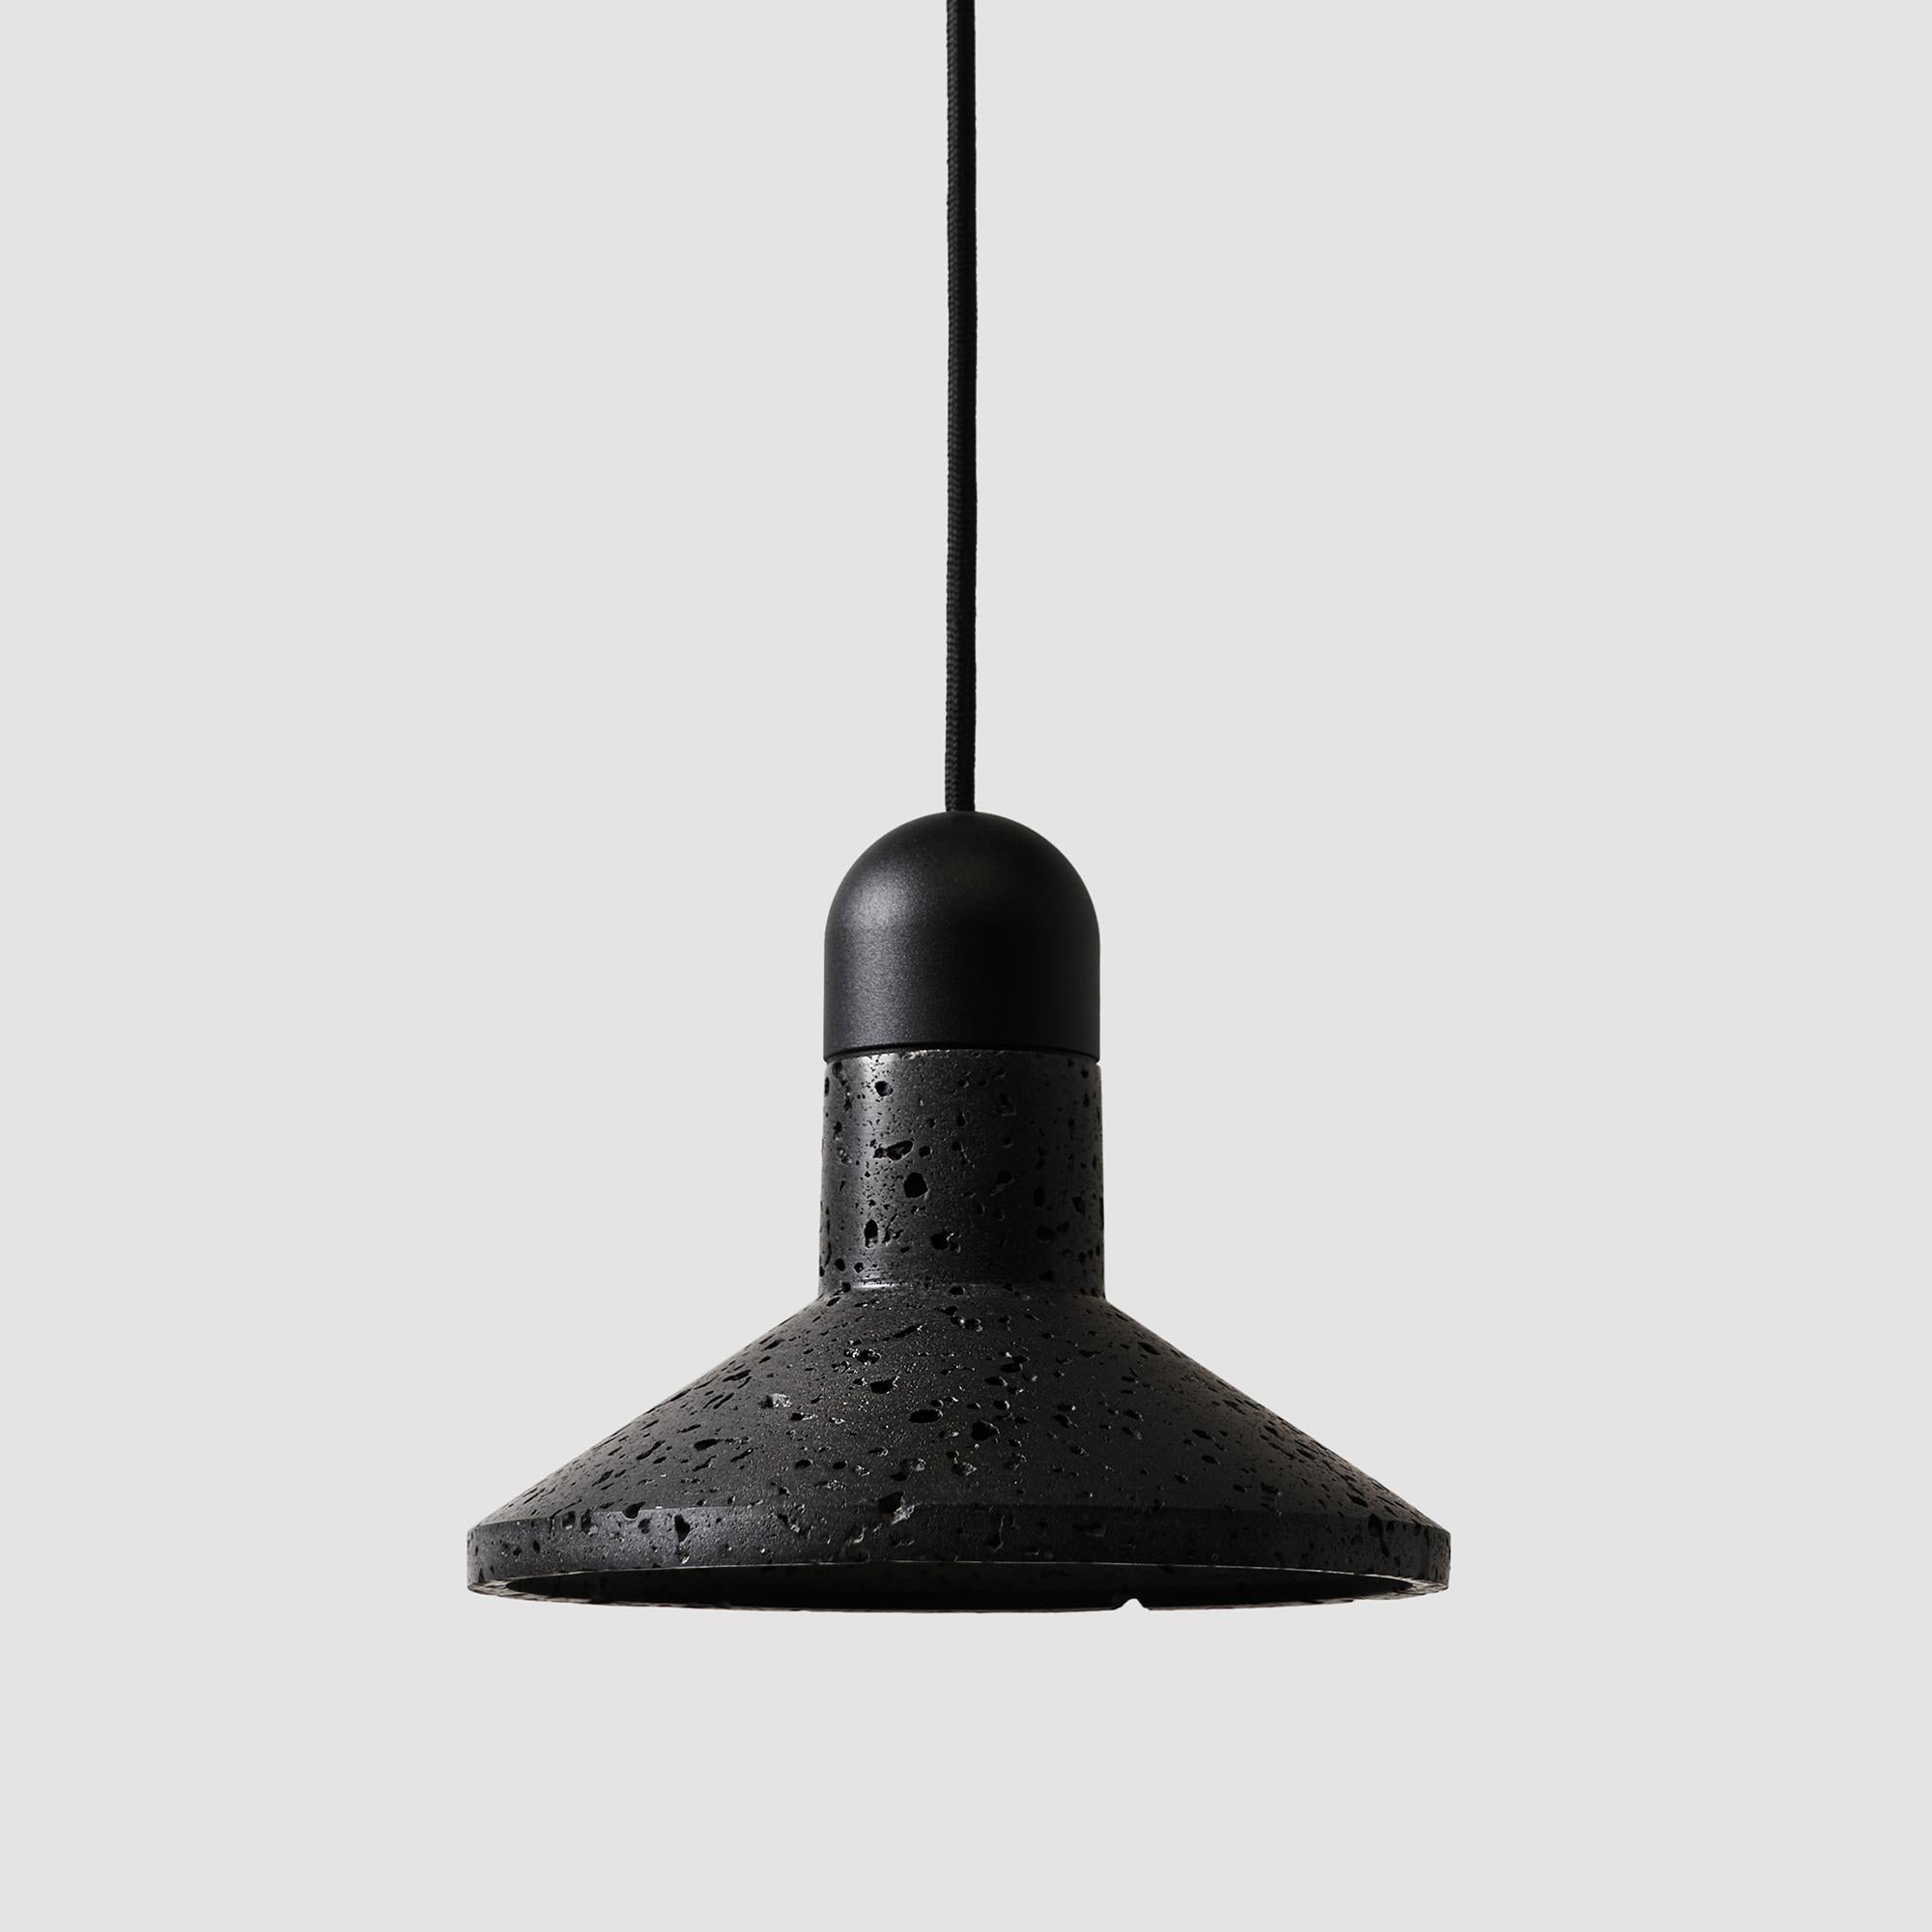 Material: Lava Stone
Fittings: Black Aluminum
Color: Black
Dimension: 200 x 200 x 160 mm
Weight: 1.71 kg
Cord: 3010 - 2030 mm
Light Source: LED E27
CCT: 3000 - 3500 K
CRI: 80 - 90 Ra
Flux: 230 lm
Supply: 86 - 240 V
Wattage: 3 W . Max 40